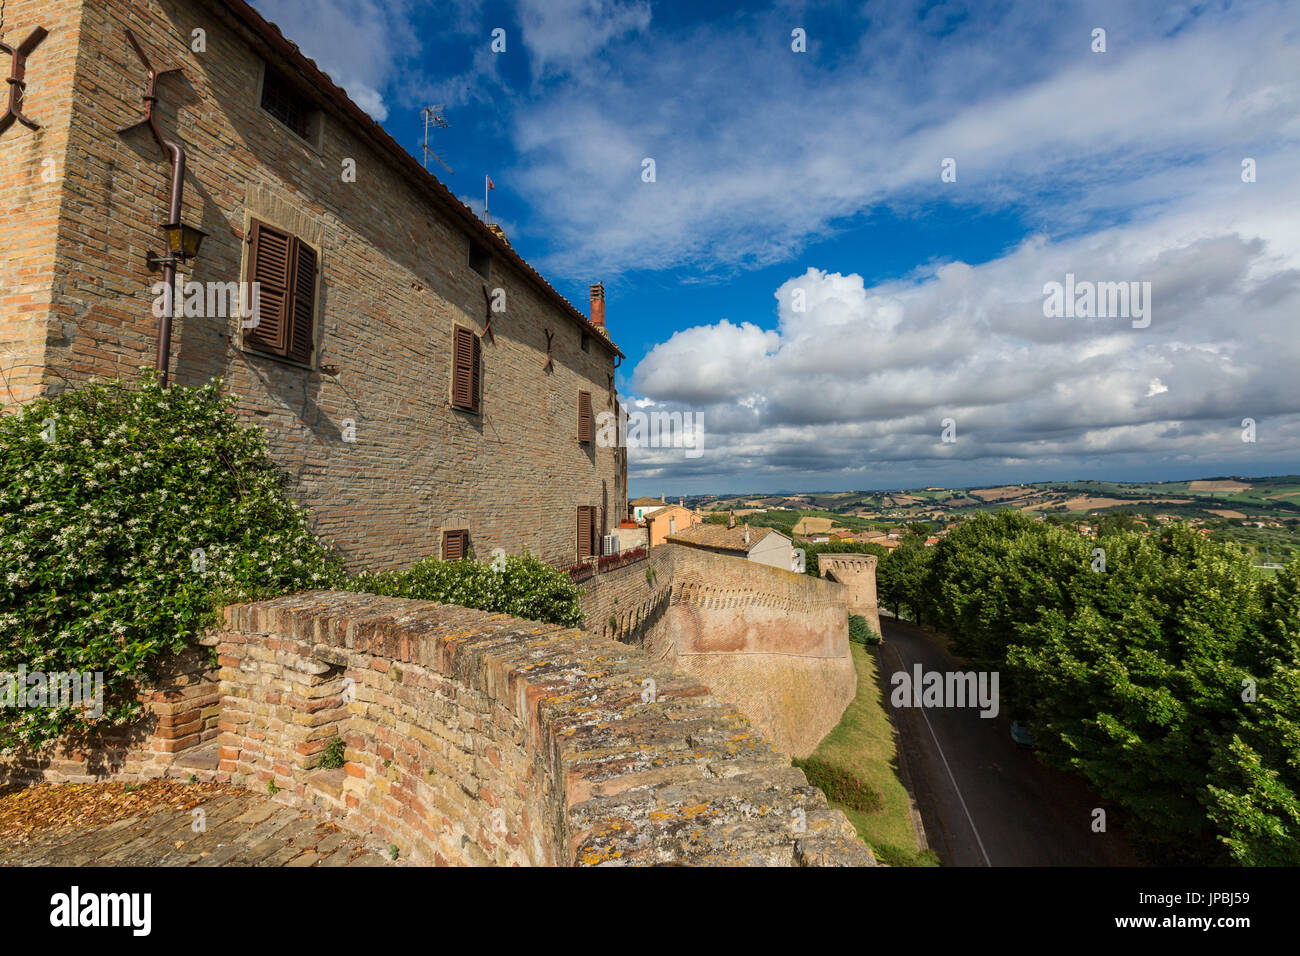 Blue sky frames the typical buildings of the old town surrounded by fields Corinaldo Province of Ancona Marche Italy Europe Stock Photo